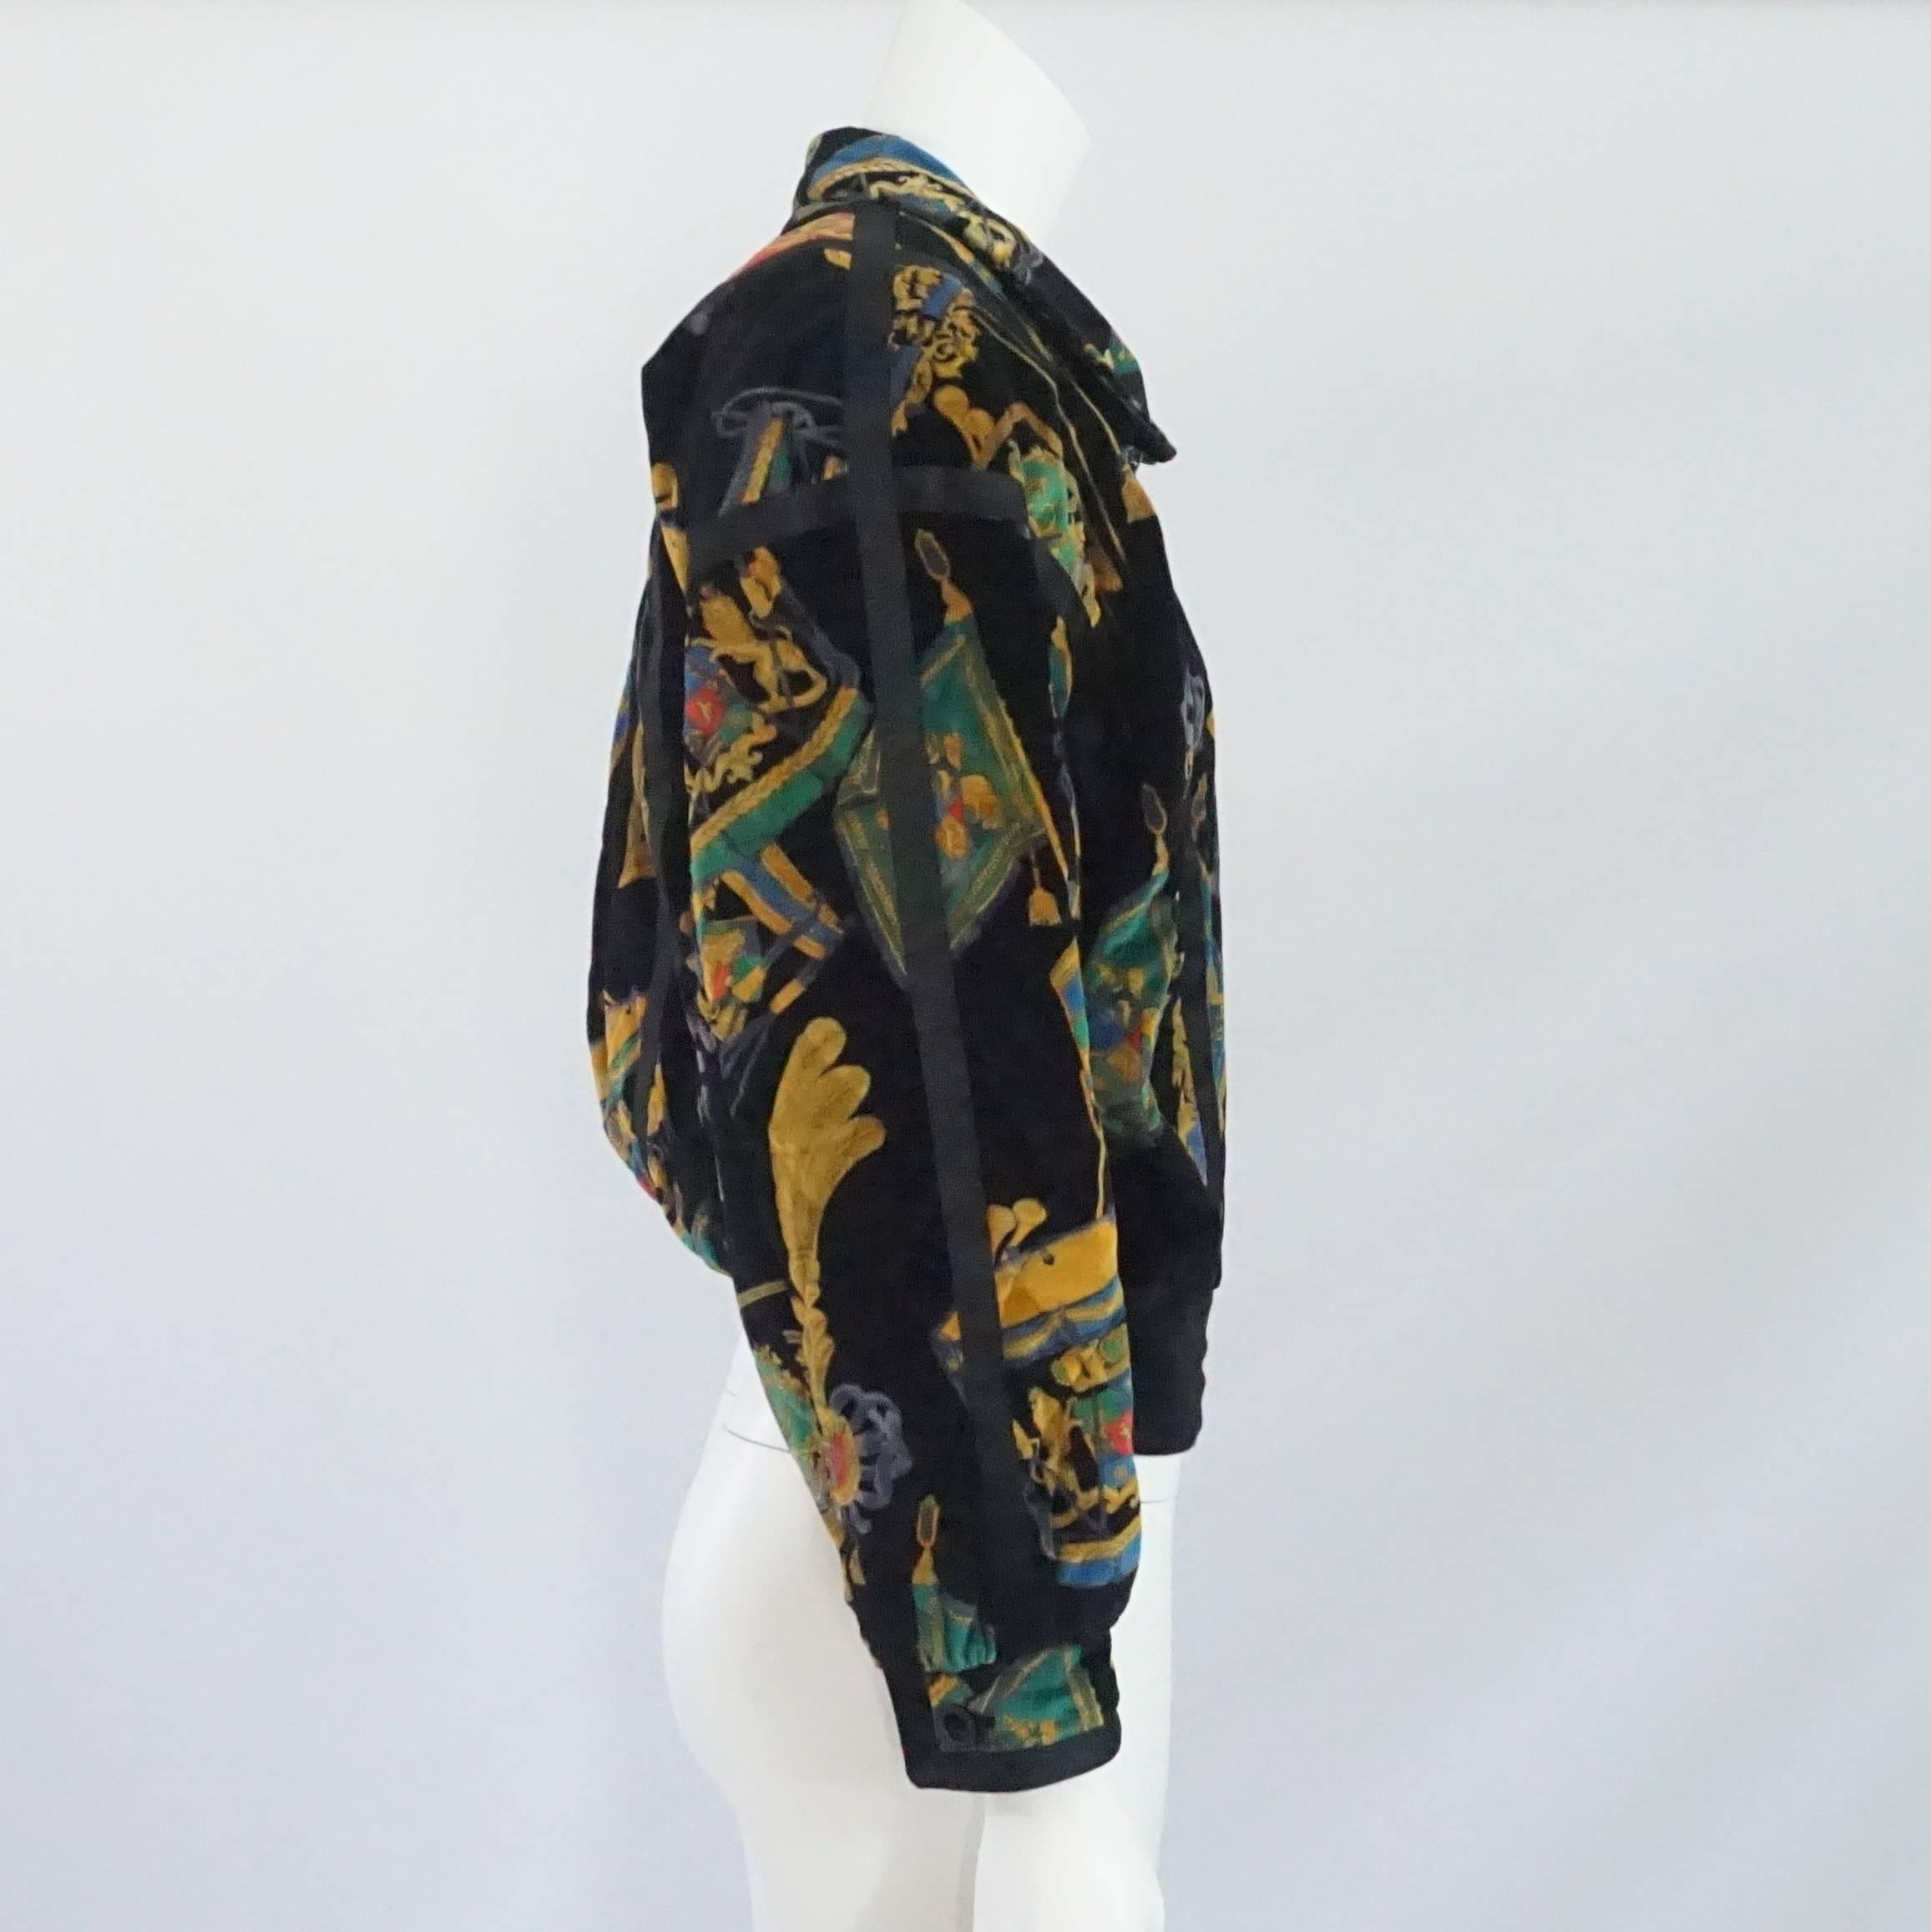 Escada by Margaretha Ley West German Multi Printed Velvet Jacket - 38 - 1980's. This jacket is a colorful piece of history and an incredible fashion statement. The jacket was designed by Margaretha Ley who was one of the original founders of Escada.